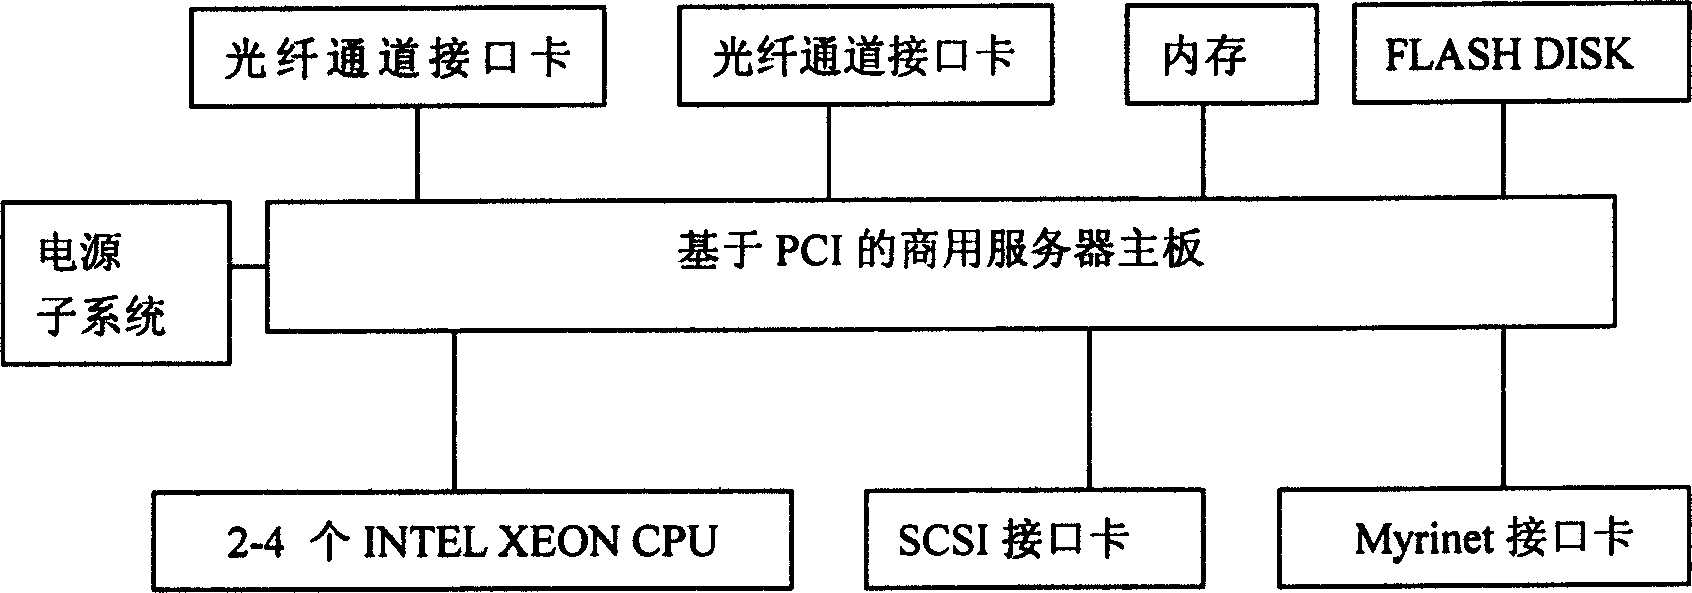 LUN CACHE method for FC-SAN memory system